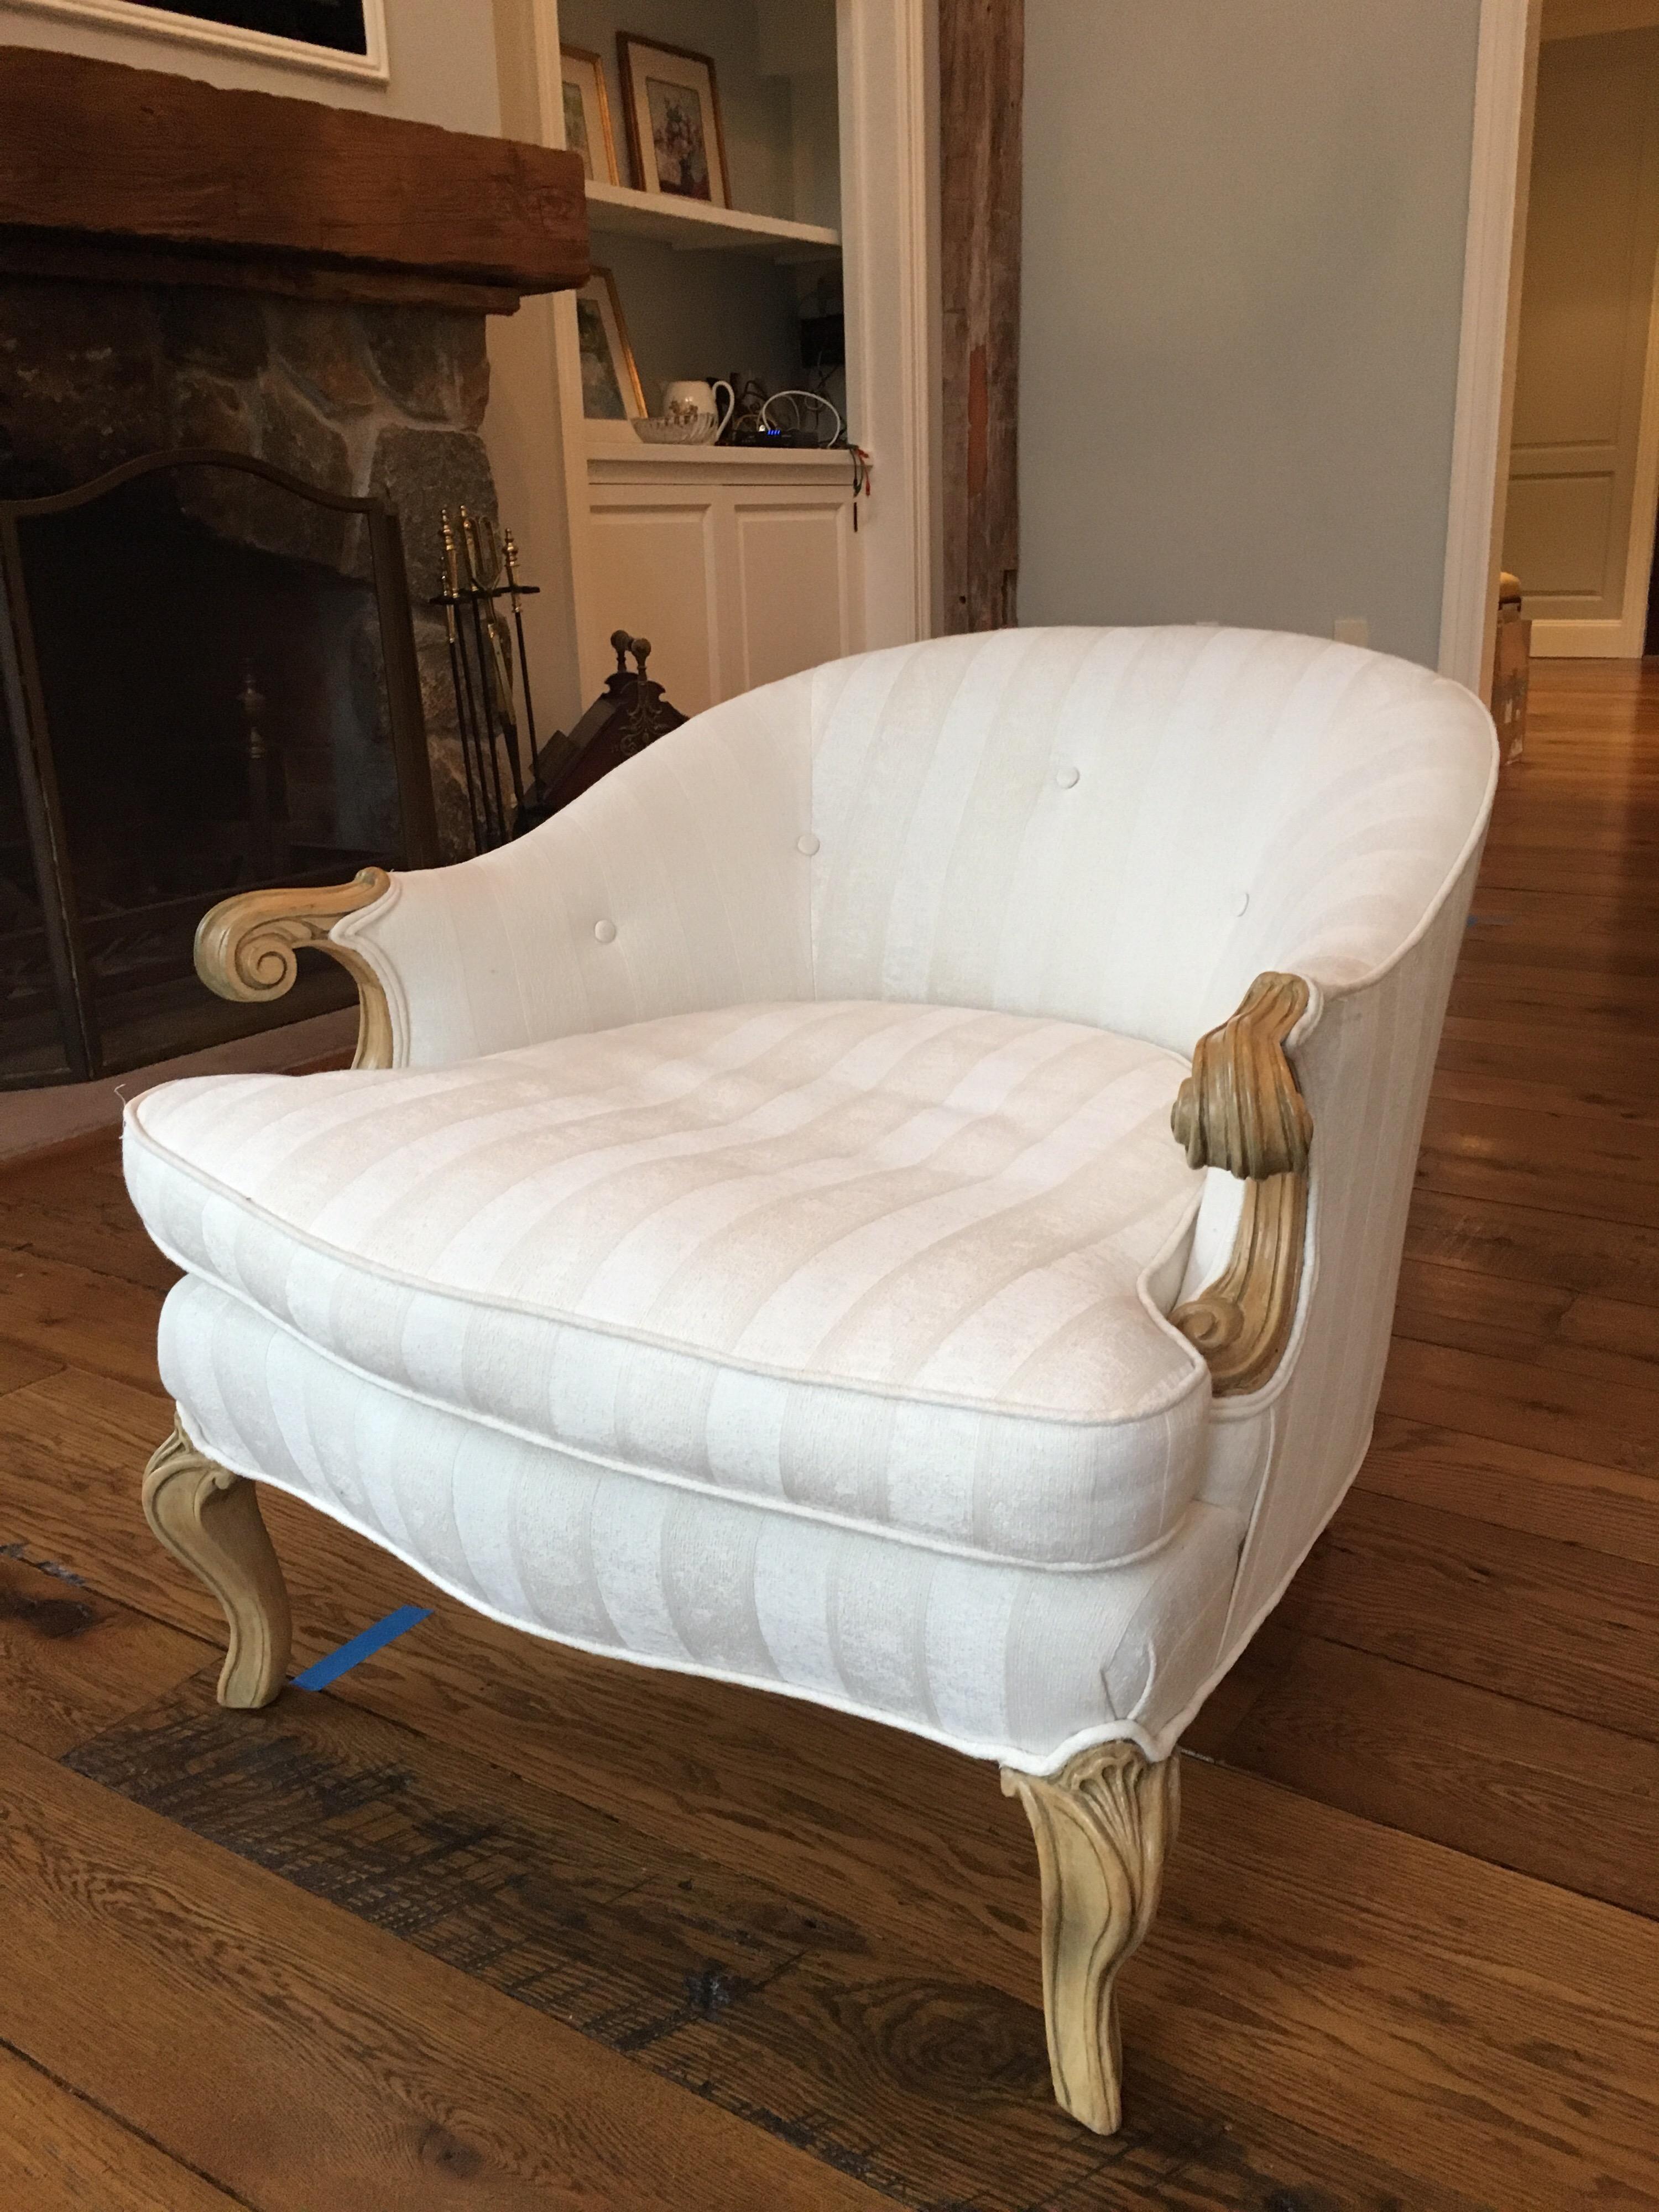 1960s French Rococo style low bergere chair. One available in excellent condition. Original gilded finish taken back to a pale blond finish. These low chairs are quite substantial and in very good condition. The upholstery could use an update.